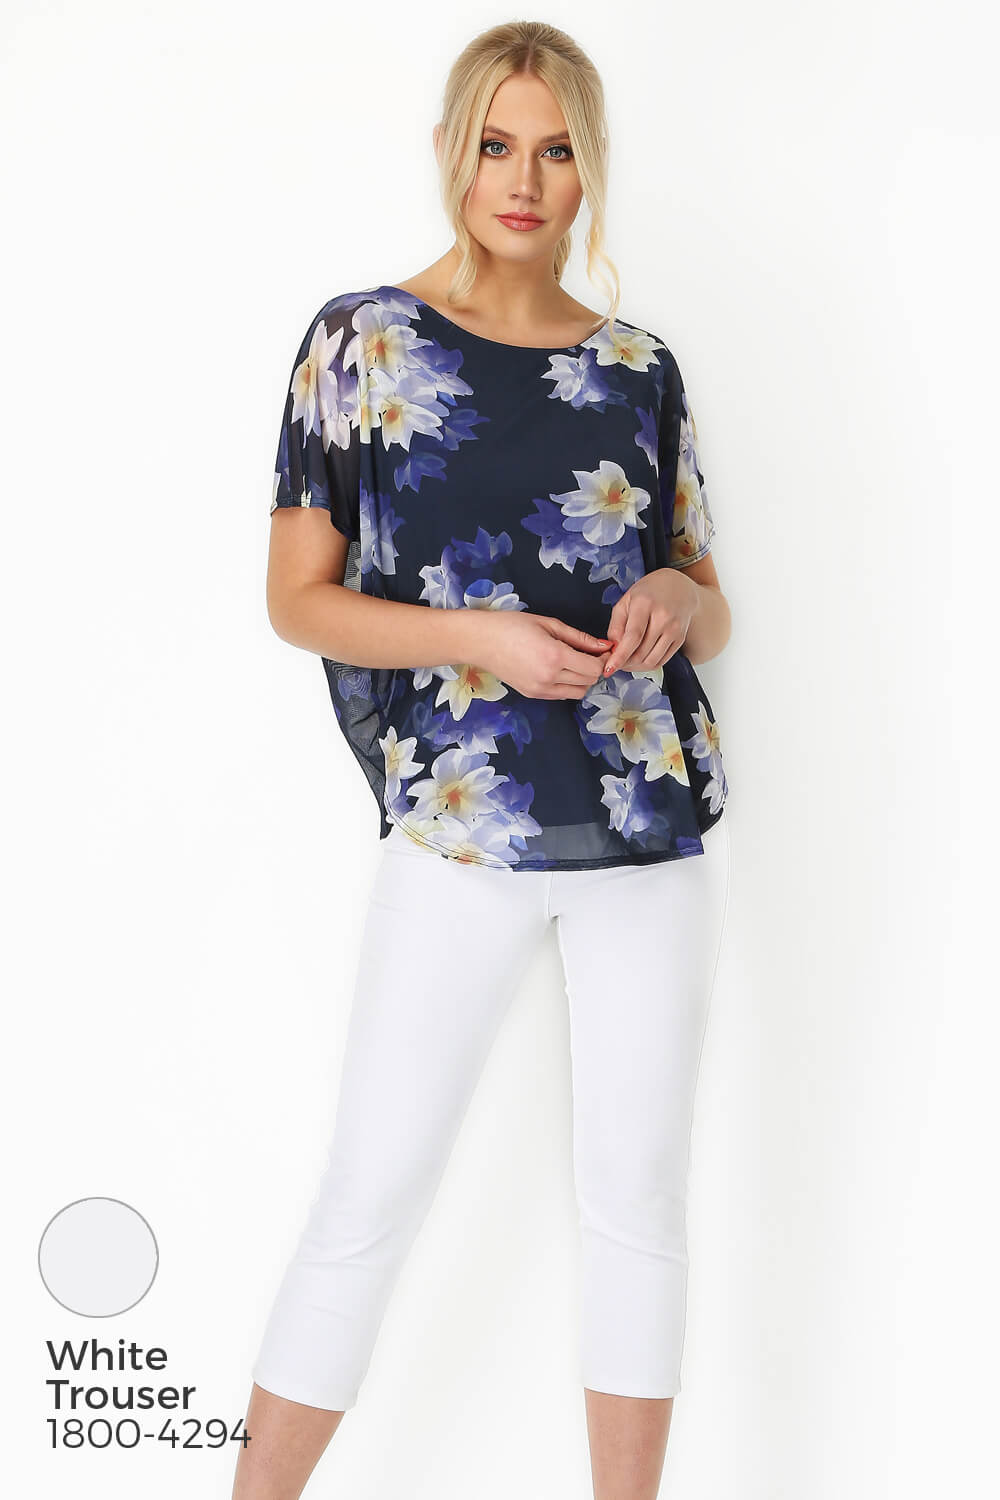 Blue Floral Chiffon Overlay Top, Image 5 of 8